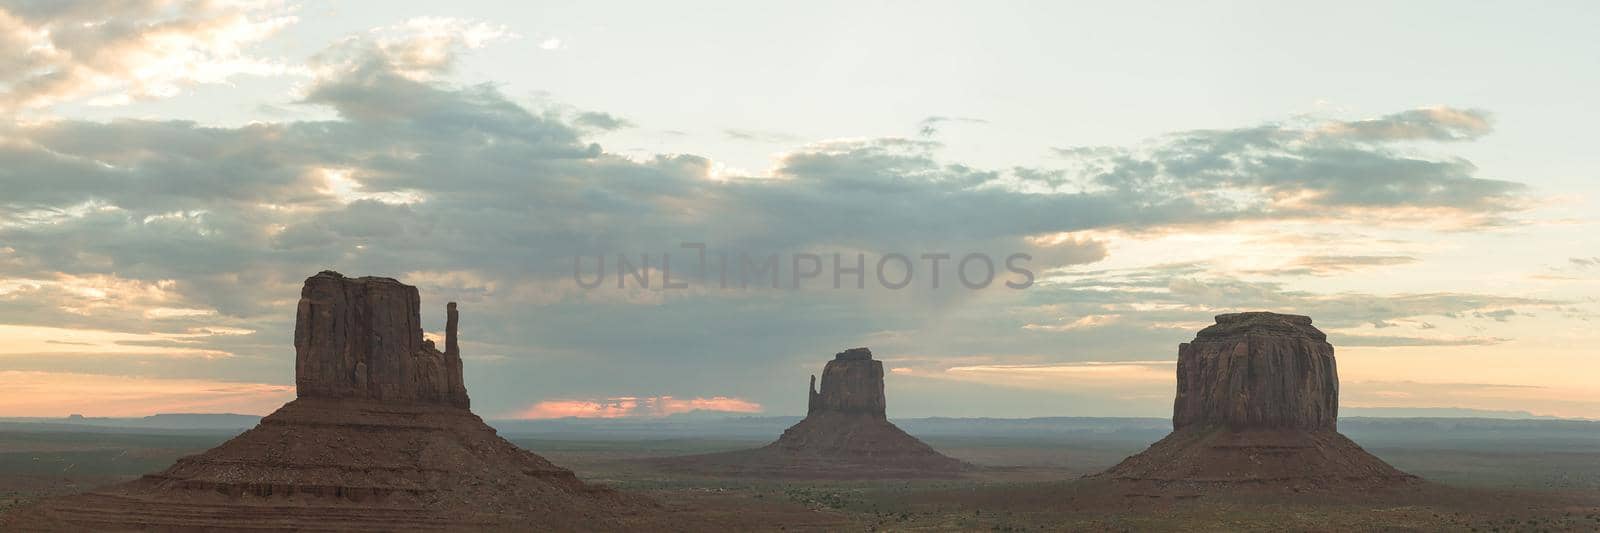 Utah panorama from John Ford's Point Monument Valley by jyurinko